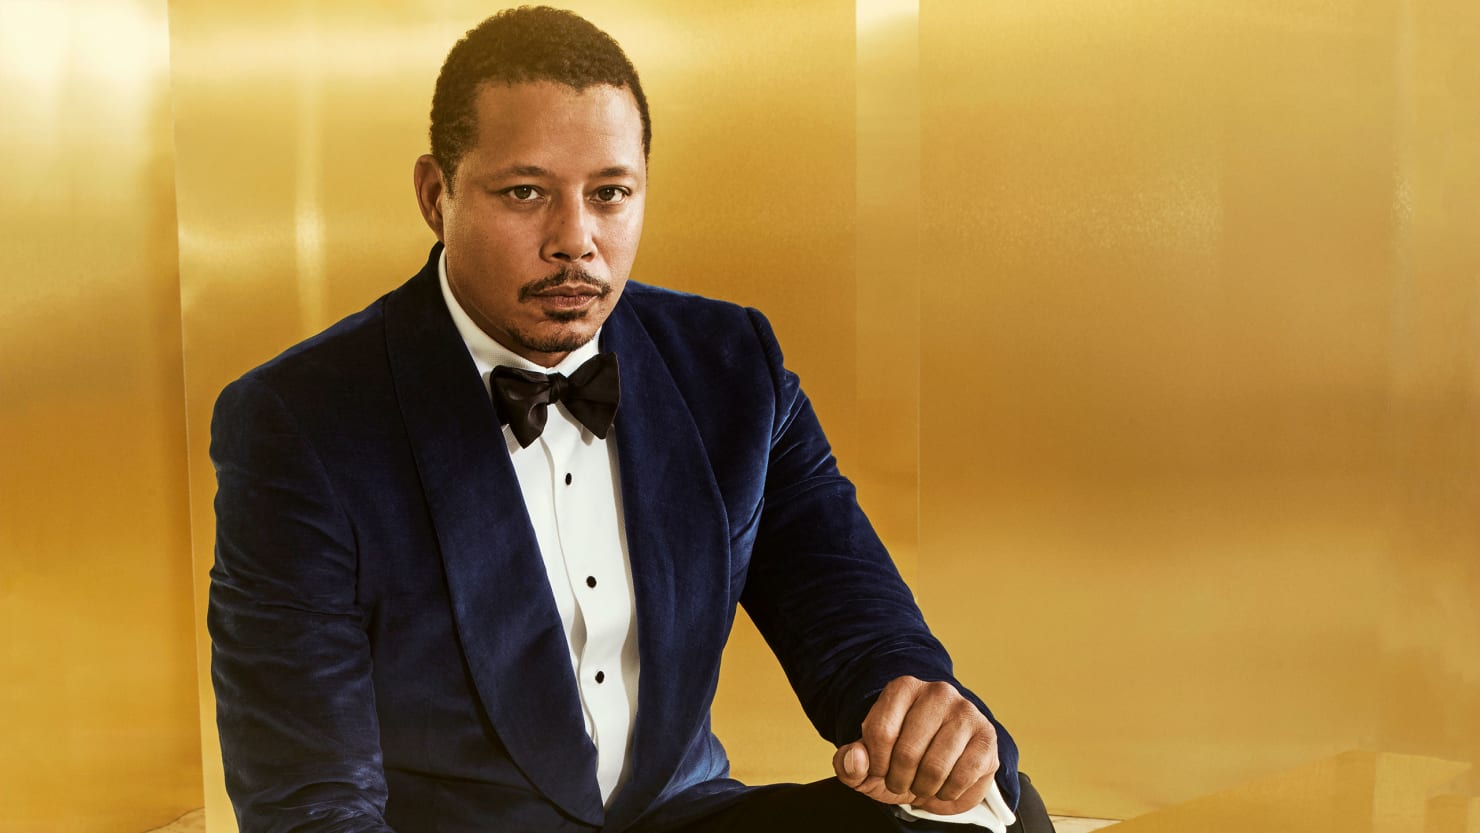 Why Terrence Howard, Alleged Abuser of Women, Is Ruining 'Empire